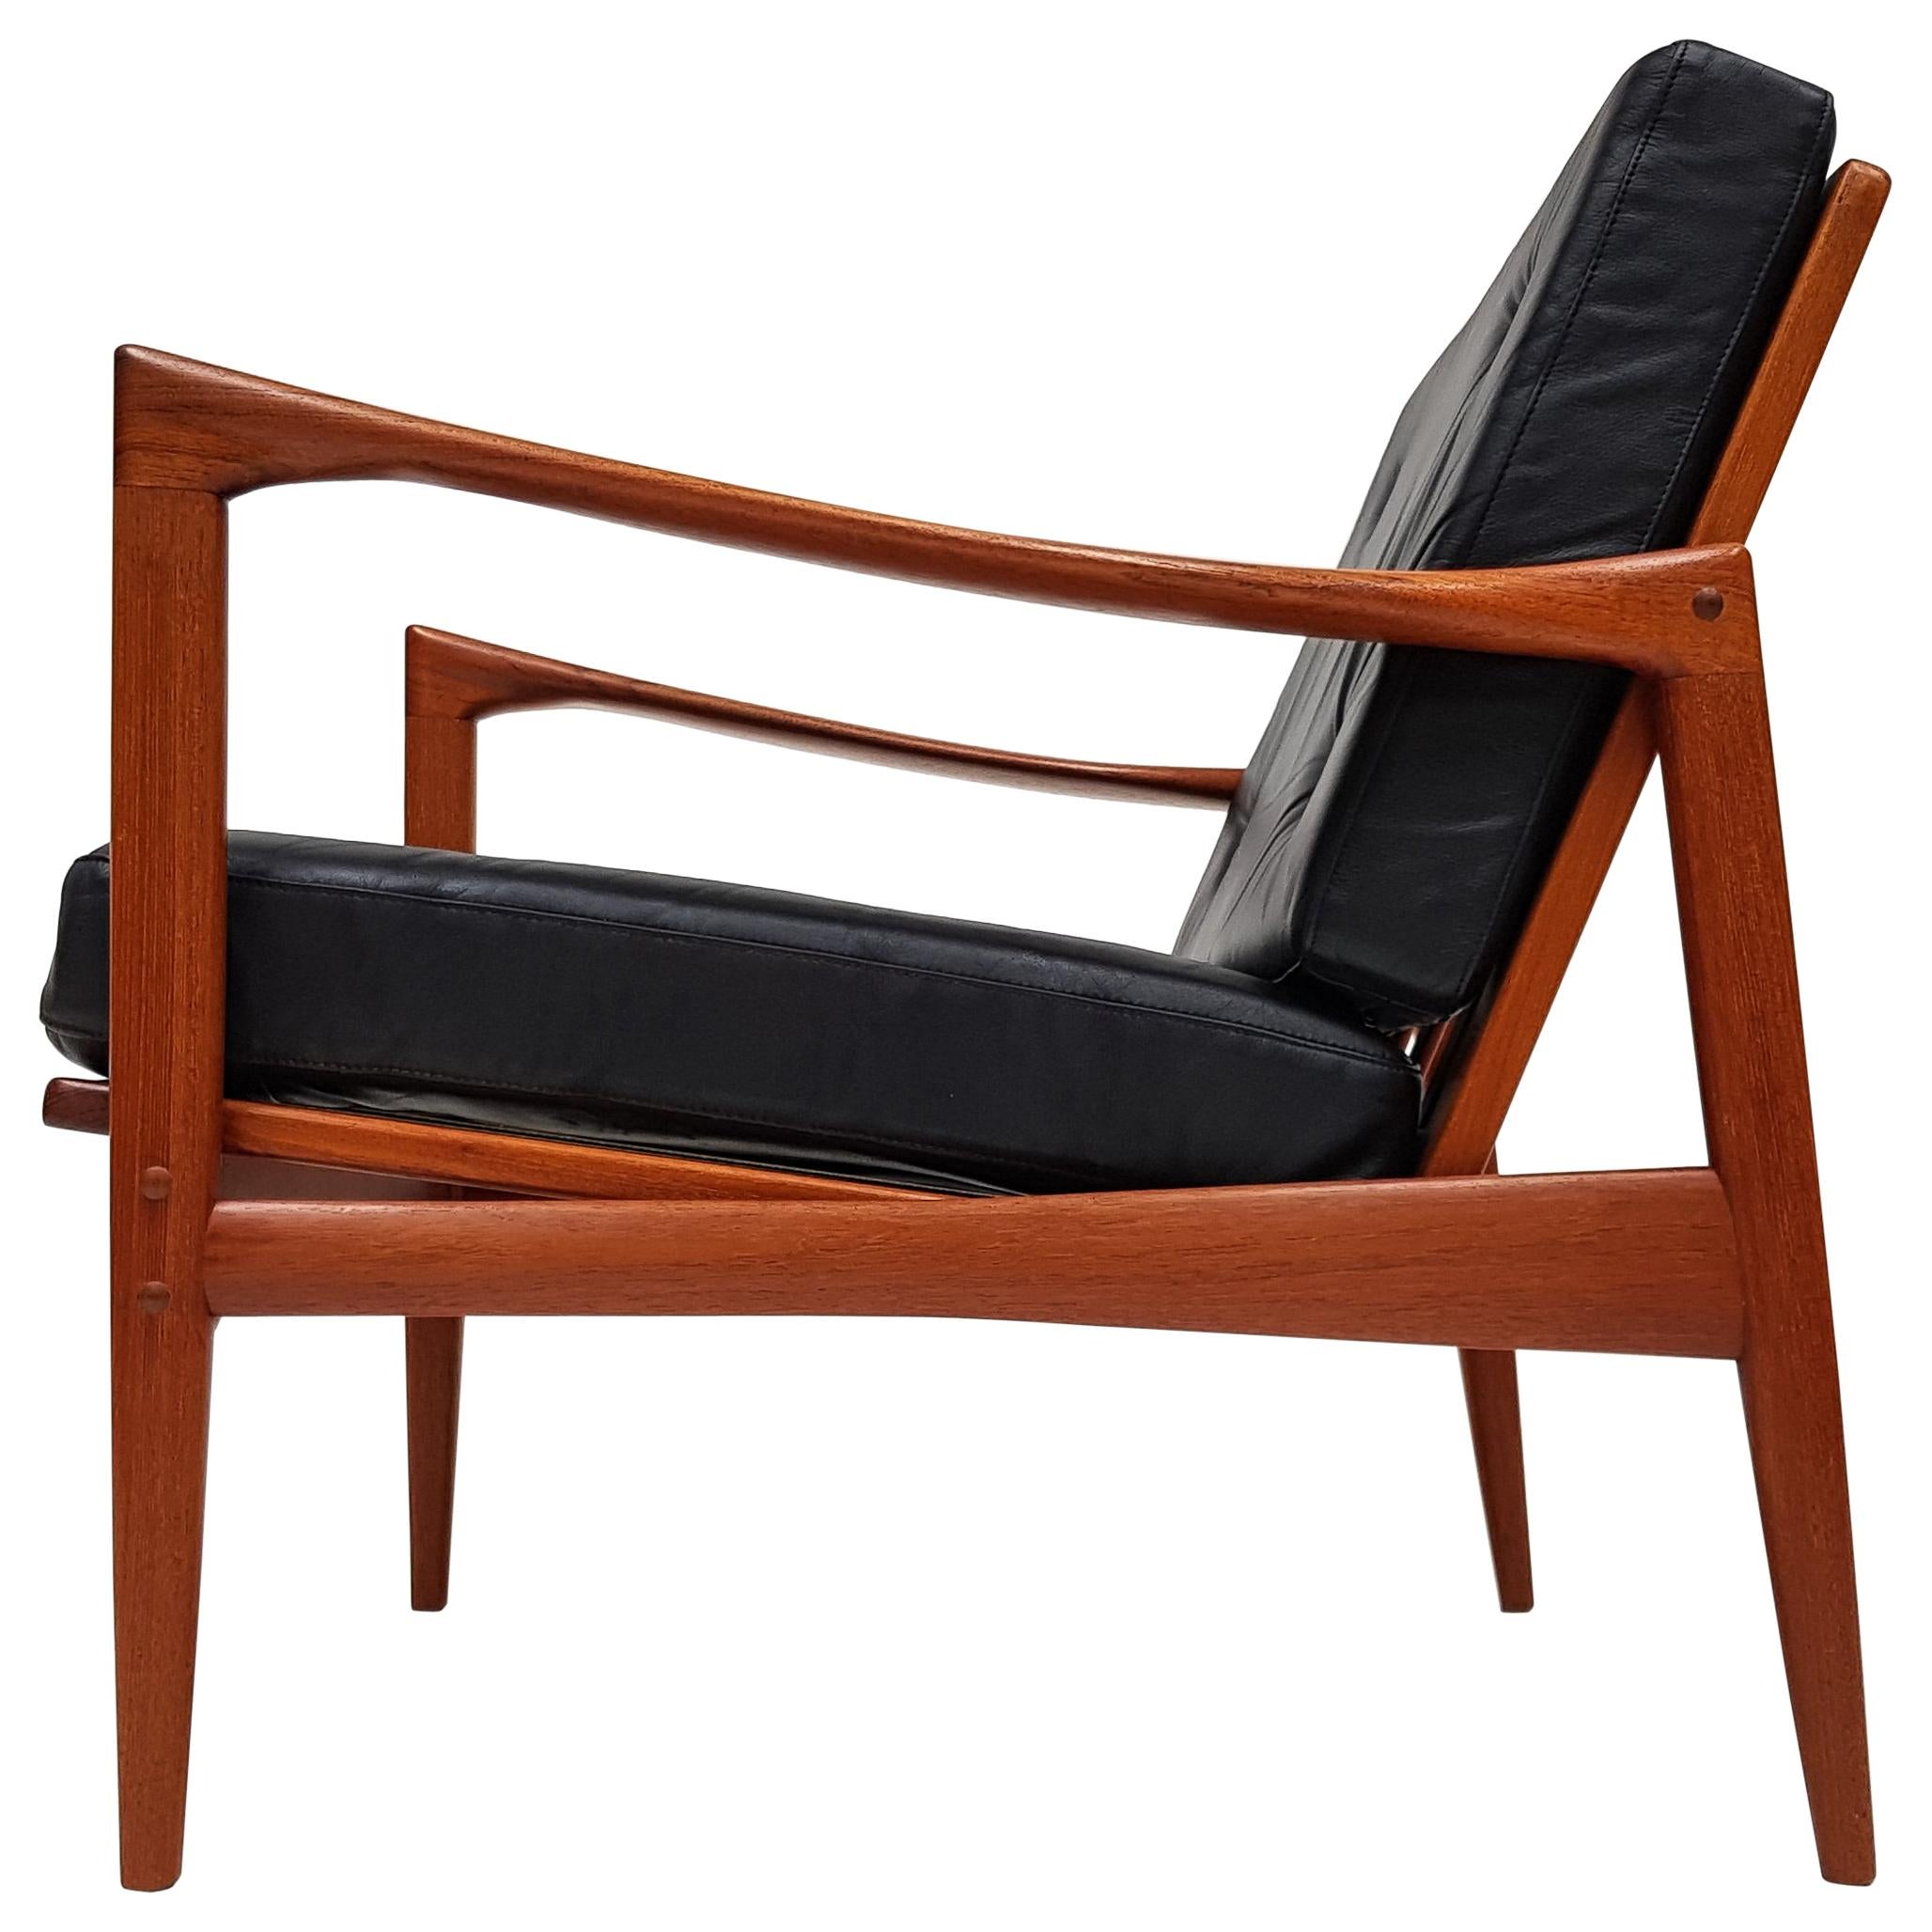 A "Kandidaten / Candidate" Chair by Ib Kofod-Larsen, OPE, Sweden, 1960s